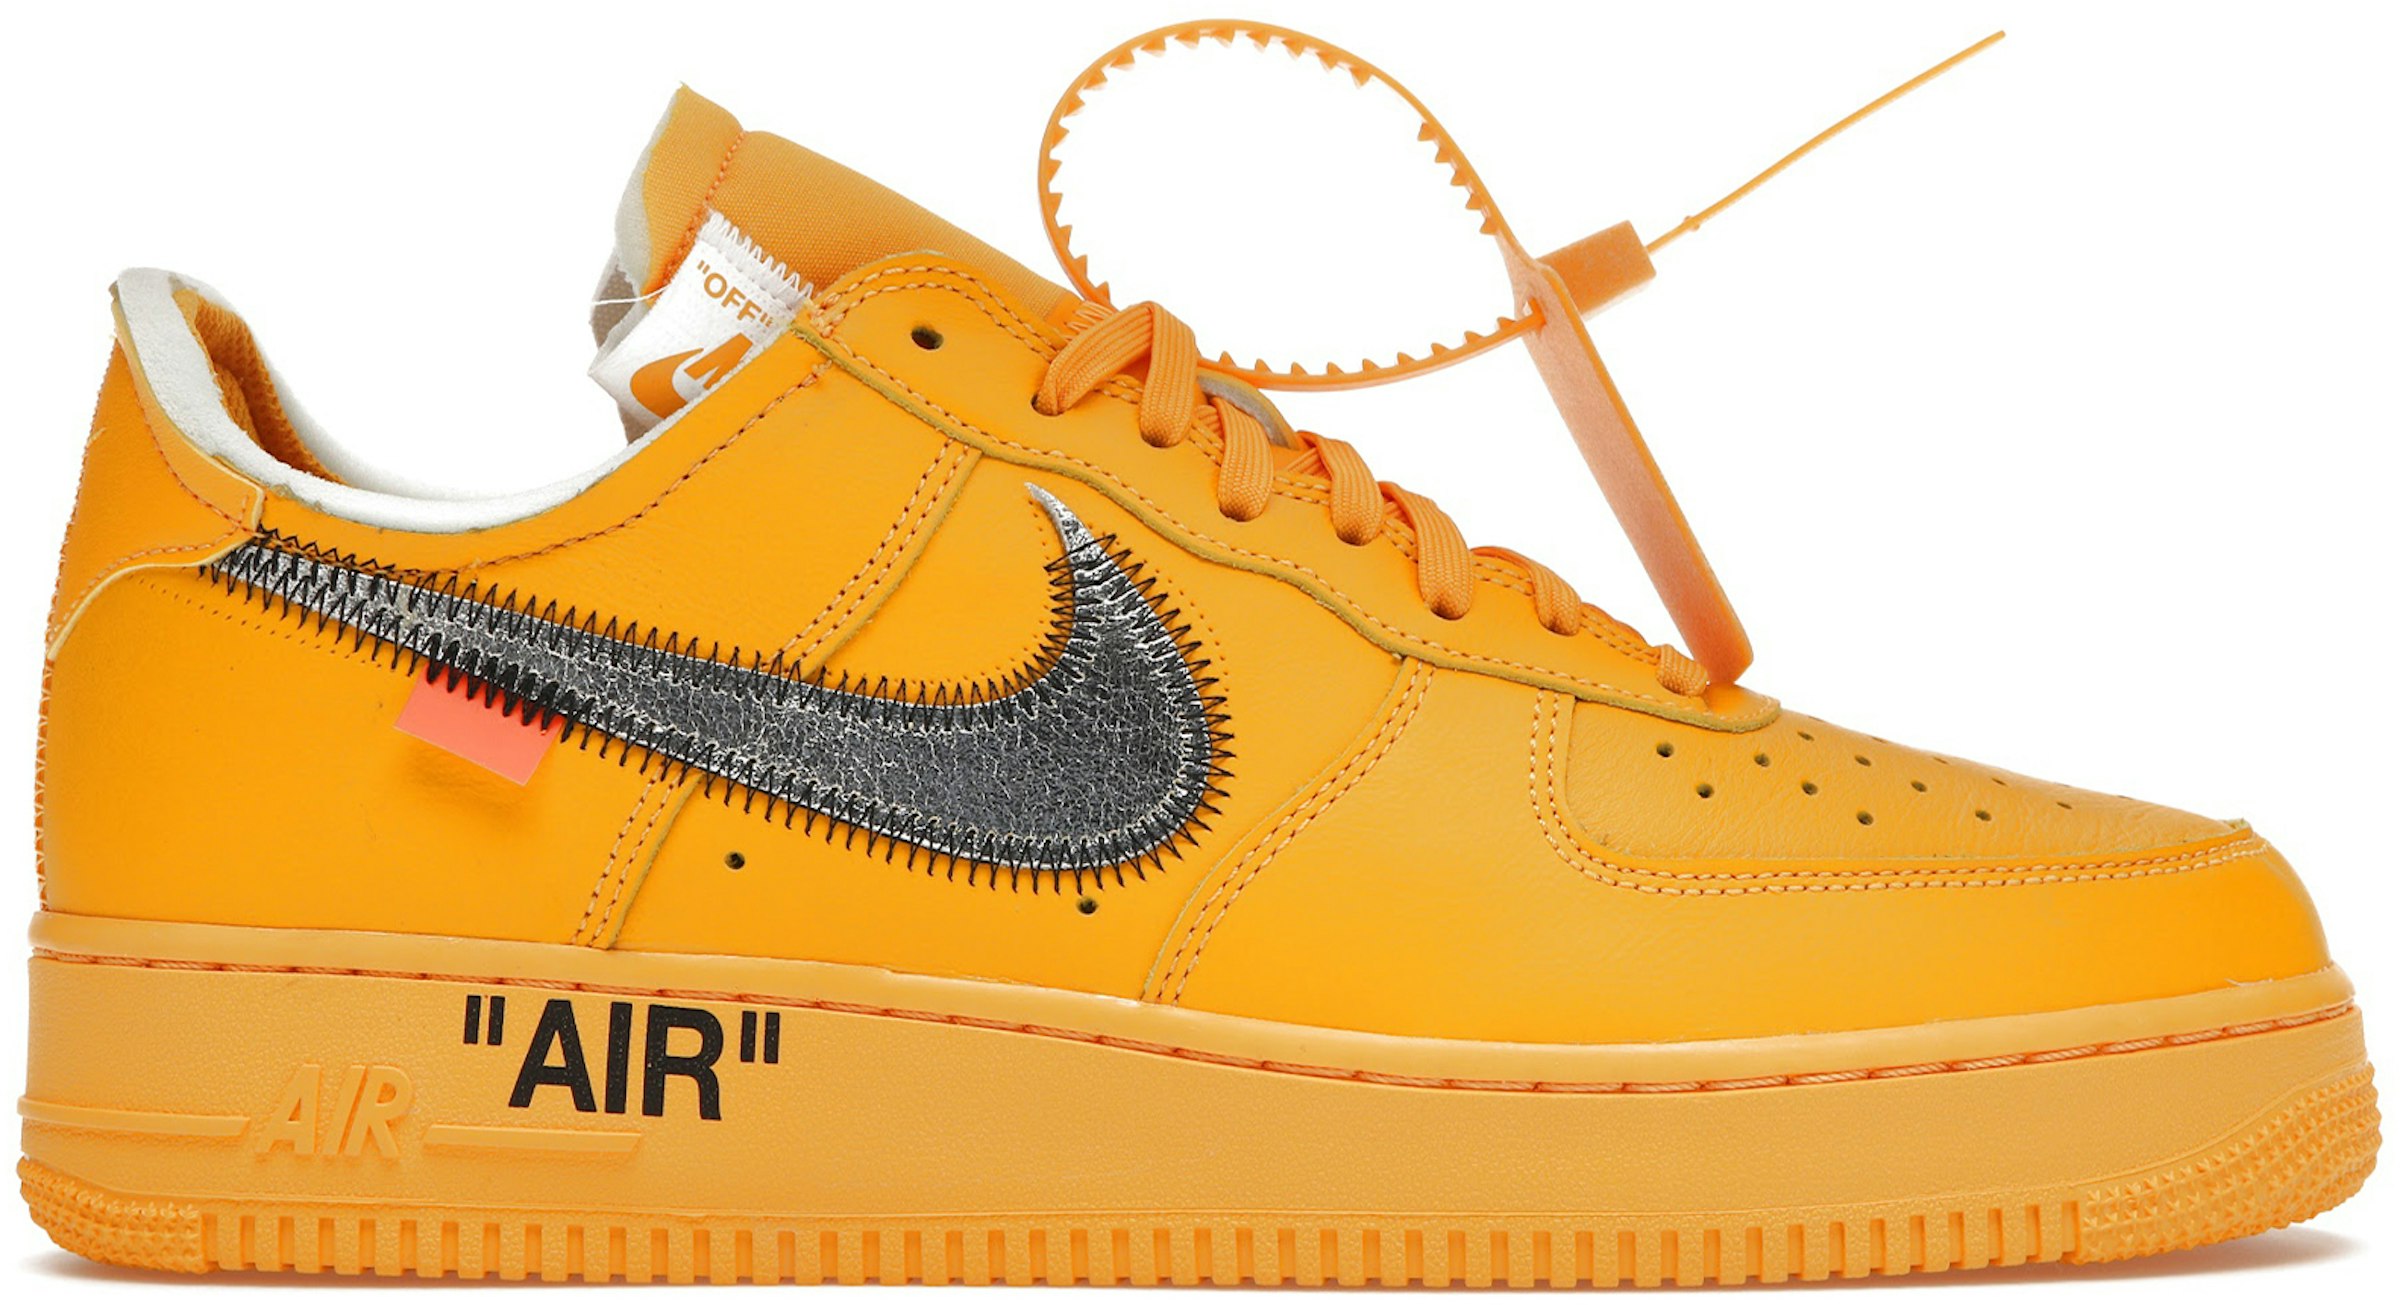 perforere Retfærdighed skygge Nike Air Force 1 Low Off-White ICA University Gold Men's - DD1876-700 - US